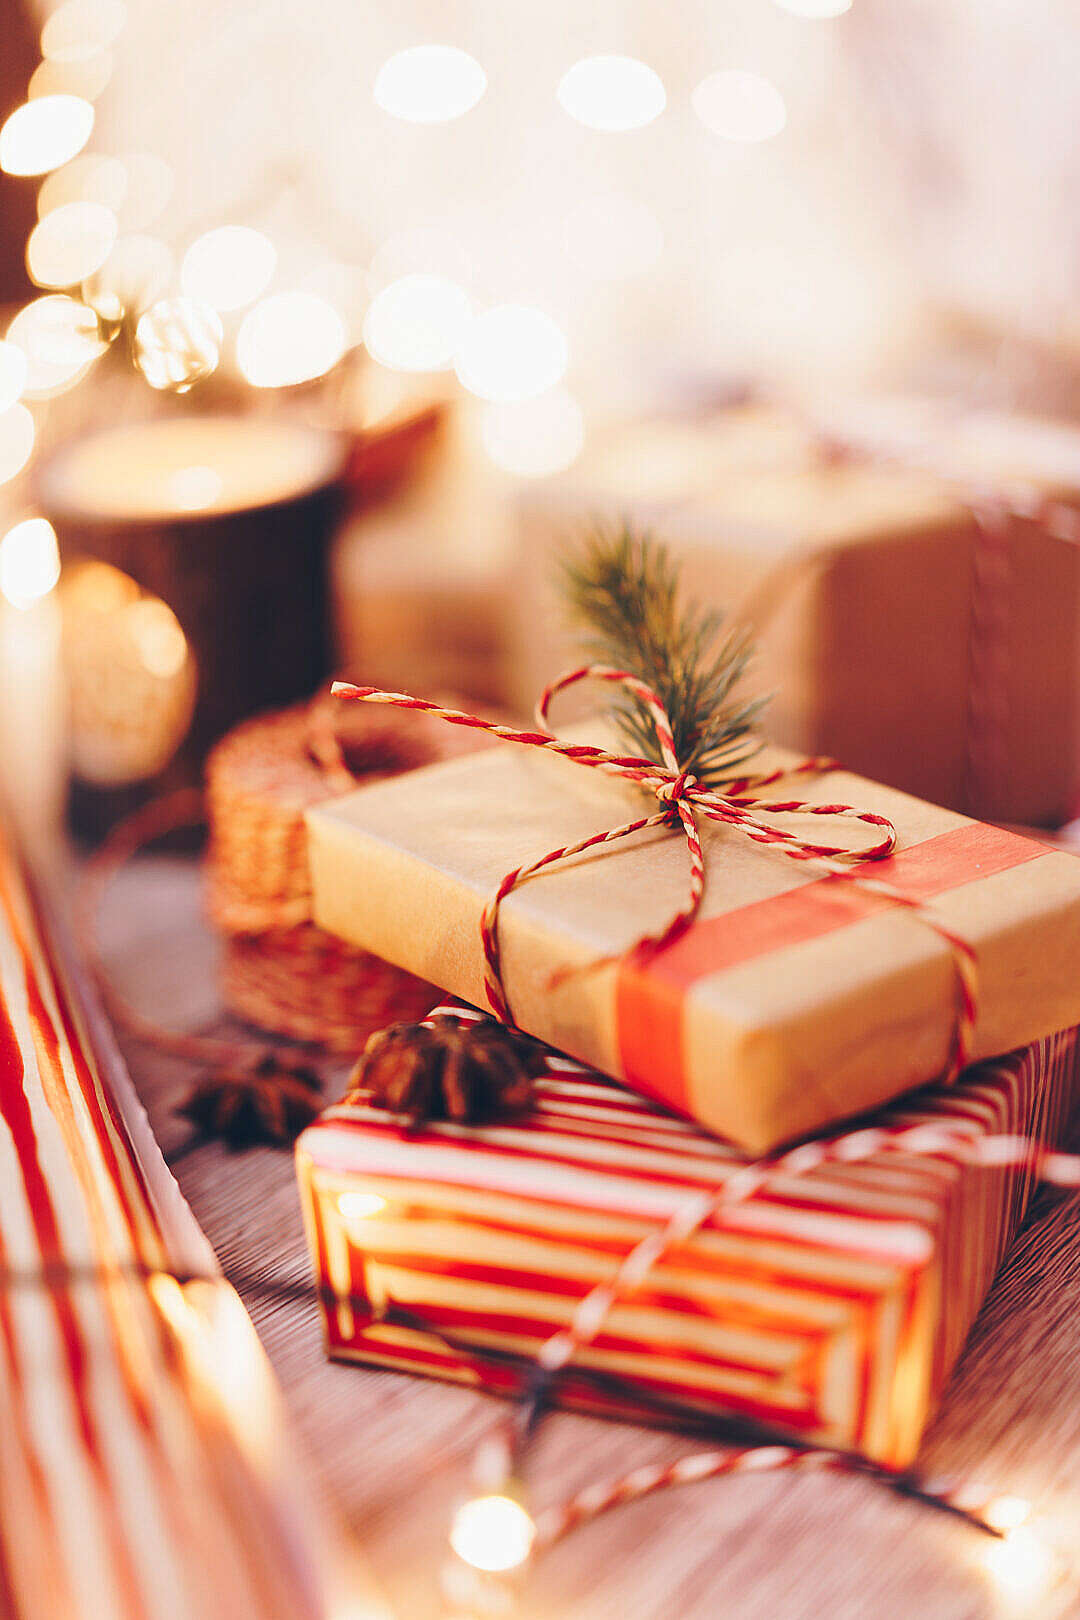 Download Beautifully Wrapped Christmas Presents FREE Stock Photo